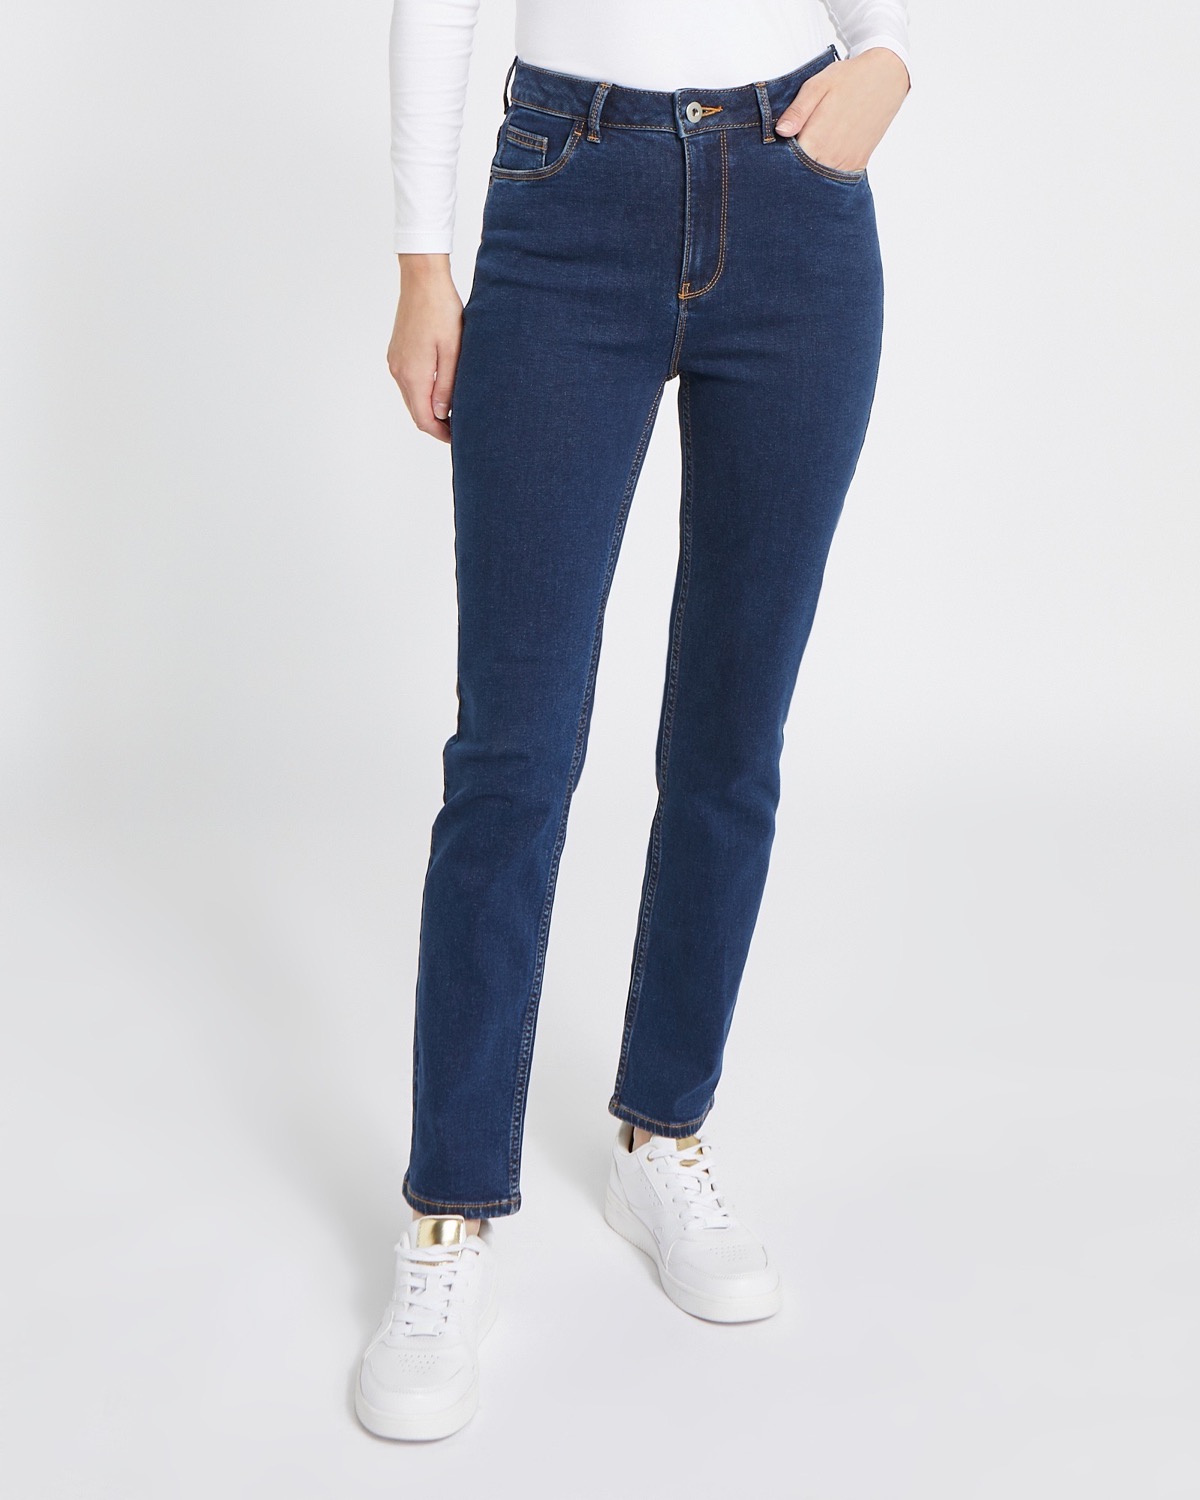 muffin top high waisted jeans